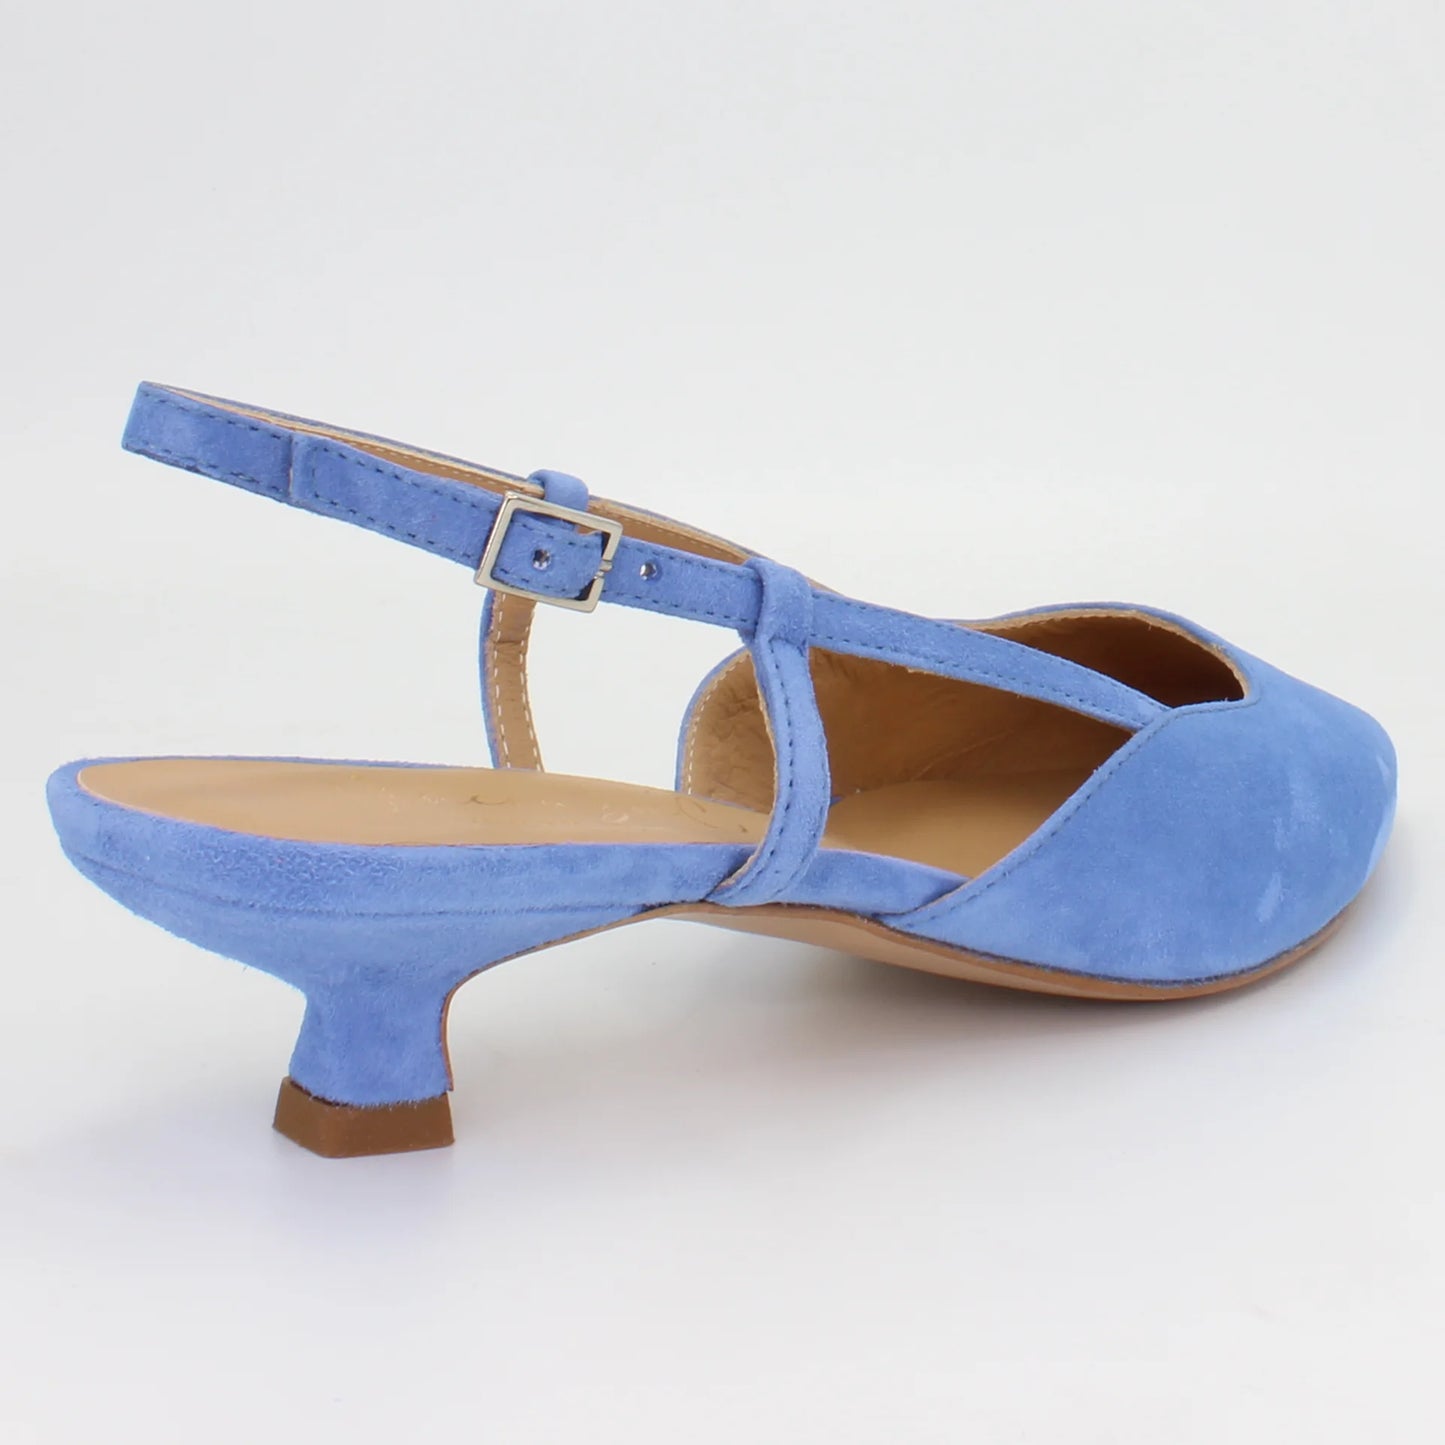 Shop Handmade Italian Leather Suede Low Sling Back Heel in Jeans (VO5) or browse our range of hand-made Italian shoes for women in leather or suede in-store at Aliverti Cape Town, or shop online. We deliver in South Africa & offer multiple payment plans as well as accept multiple safe & secure payment methods.